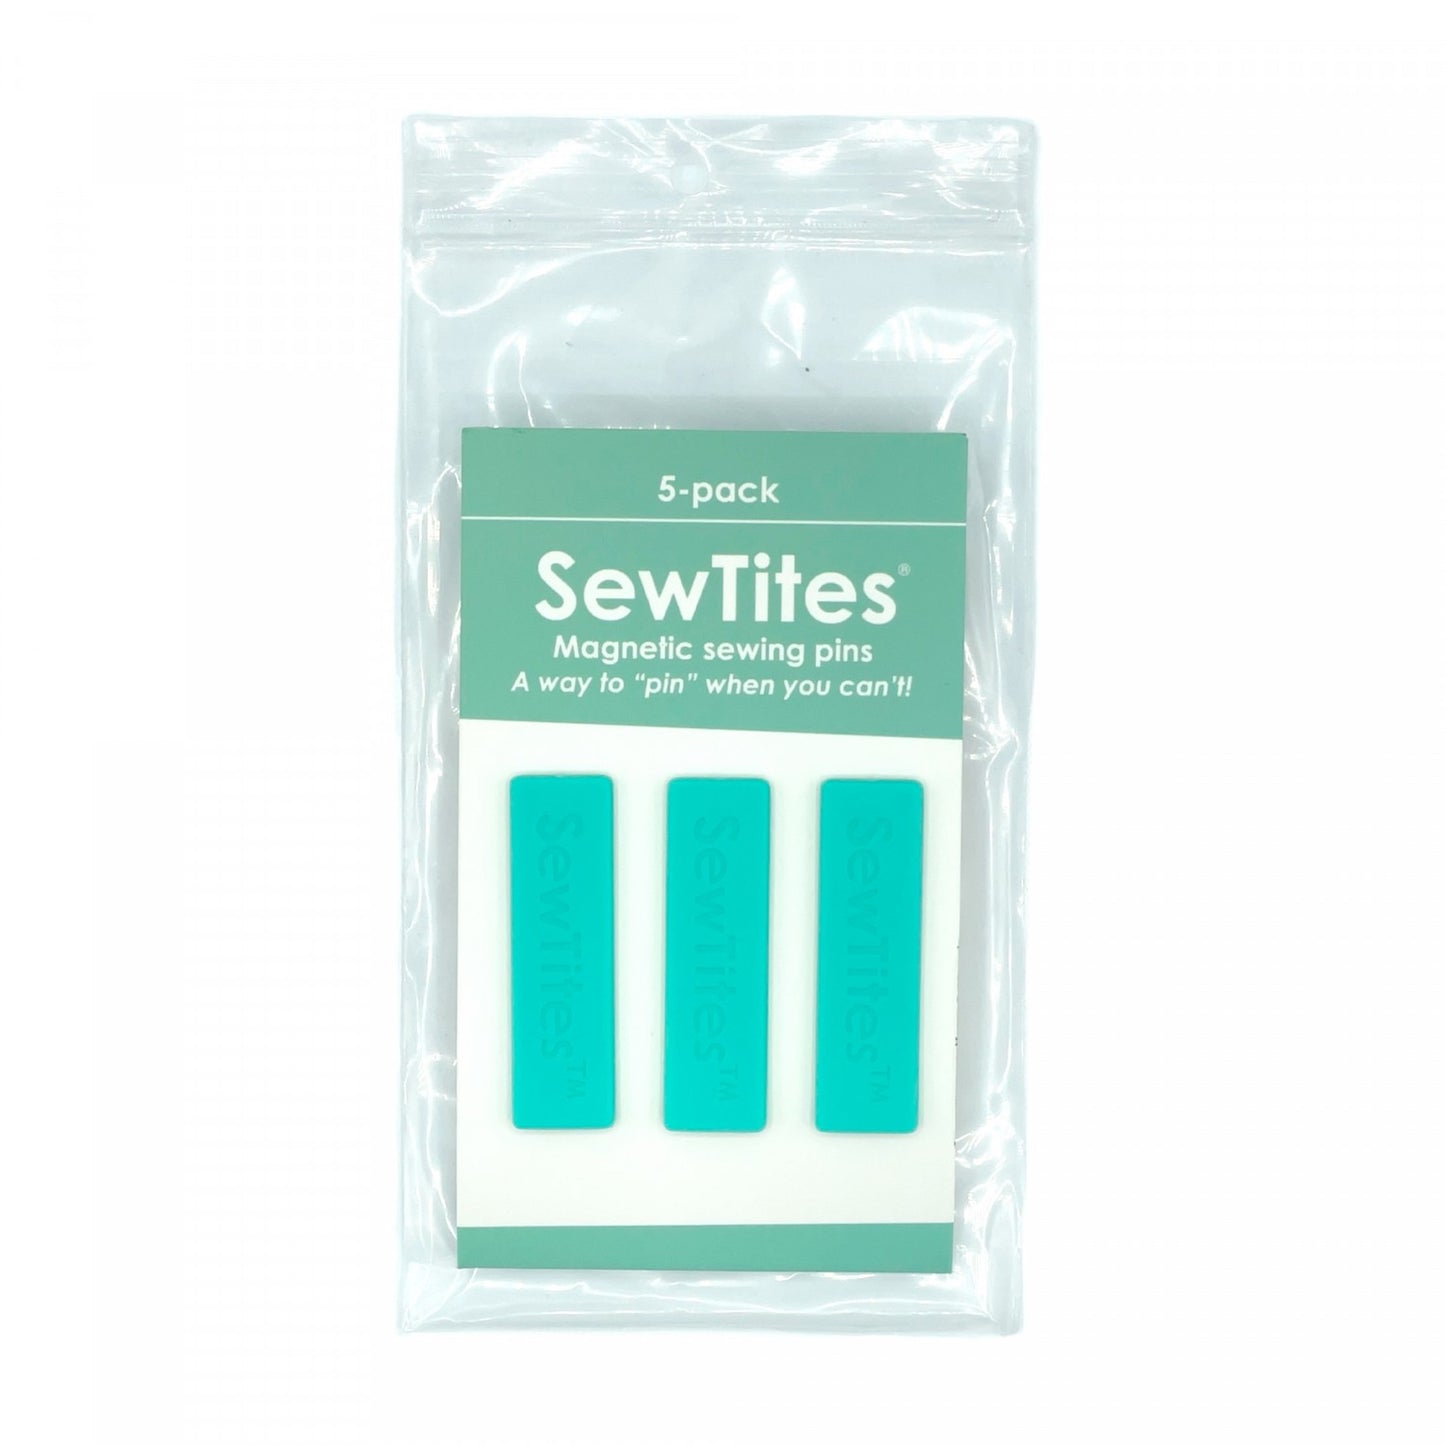 SewTites Originals- Magnetic Sewing Pins 5 Pack